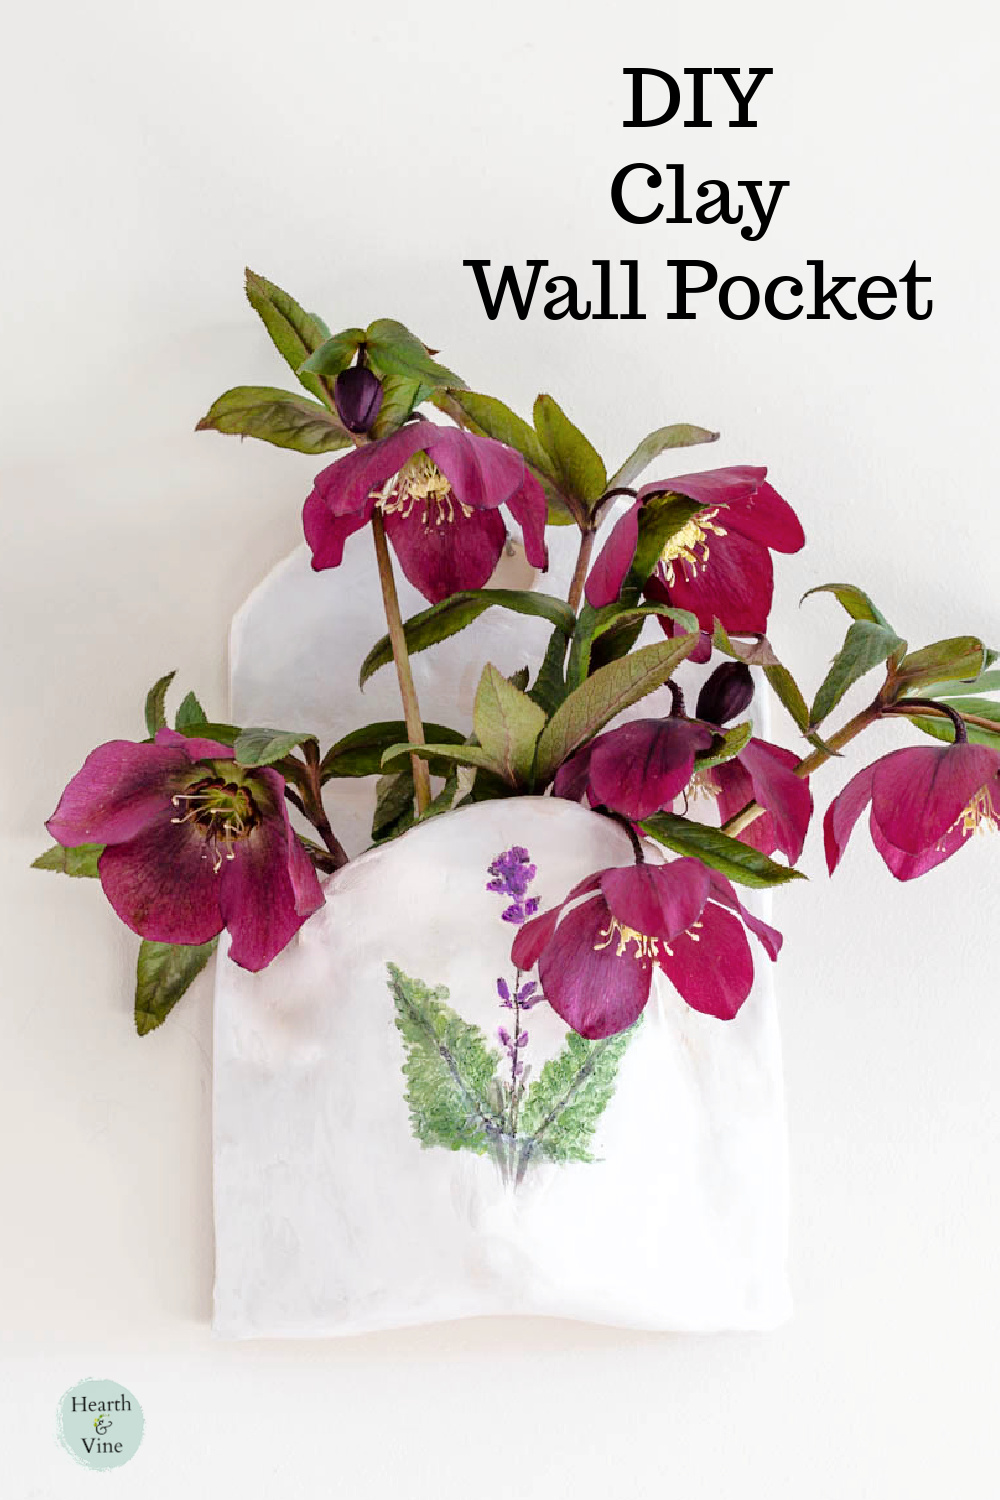 Close up of diy clay wall pocket hanging with dark purple hellebore flowers inside.